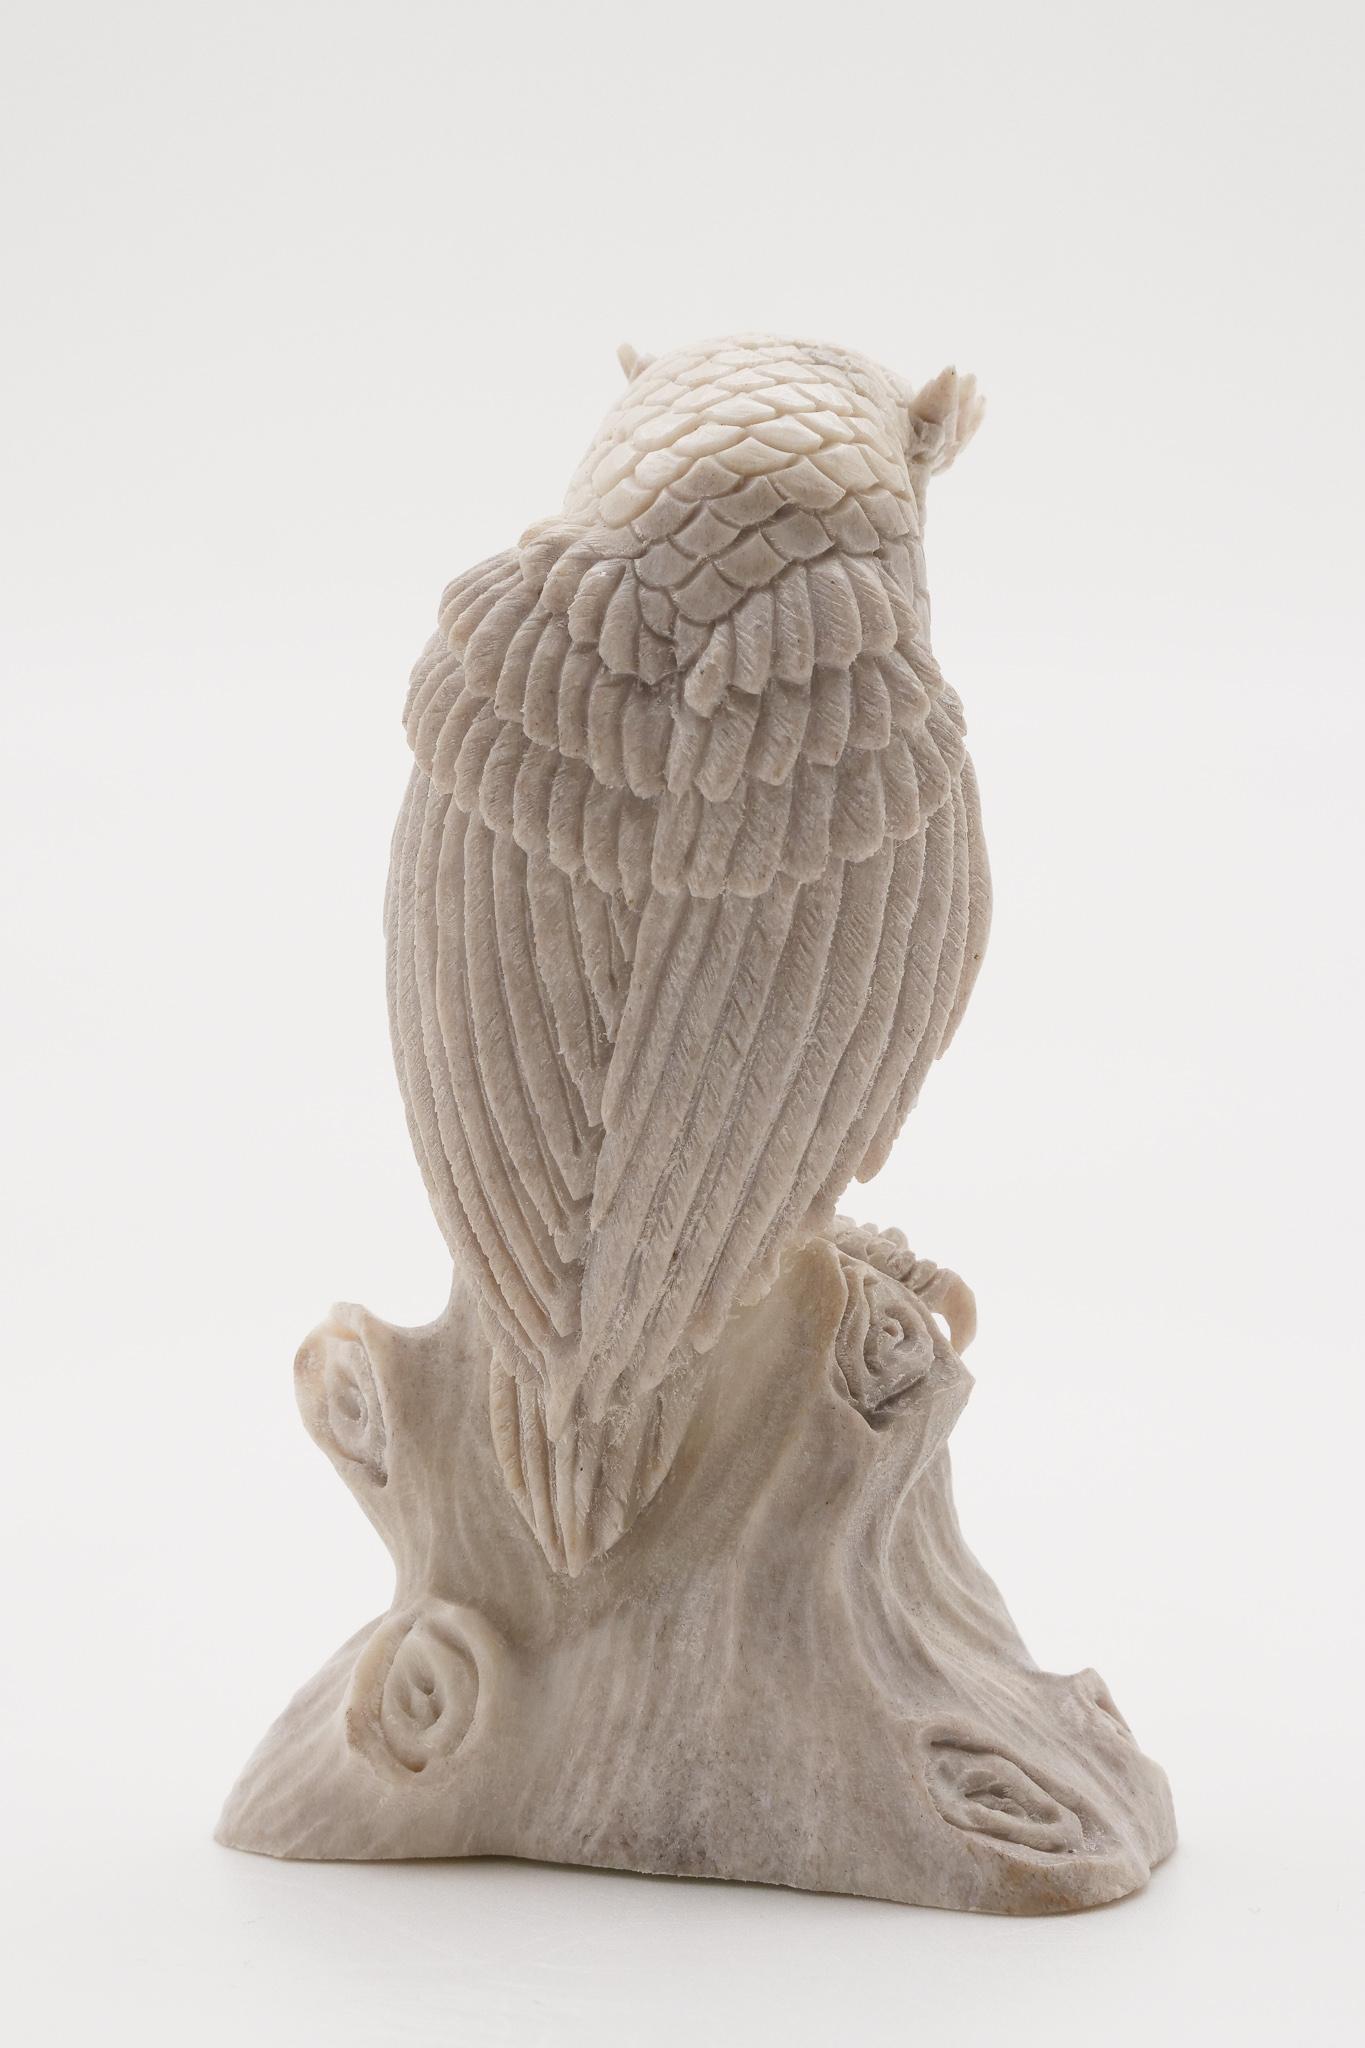 Anglo-Indian North American Moose Antler Carving of Owl